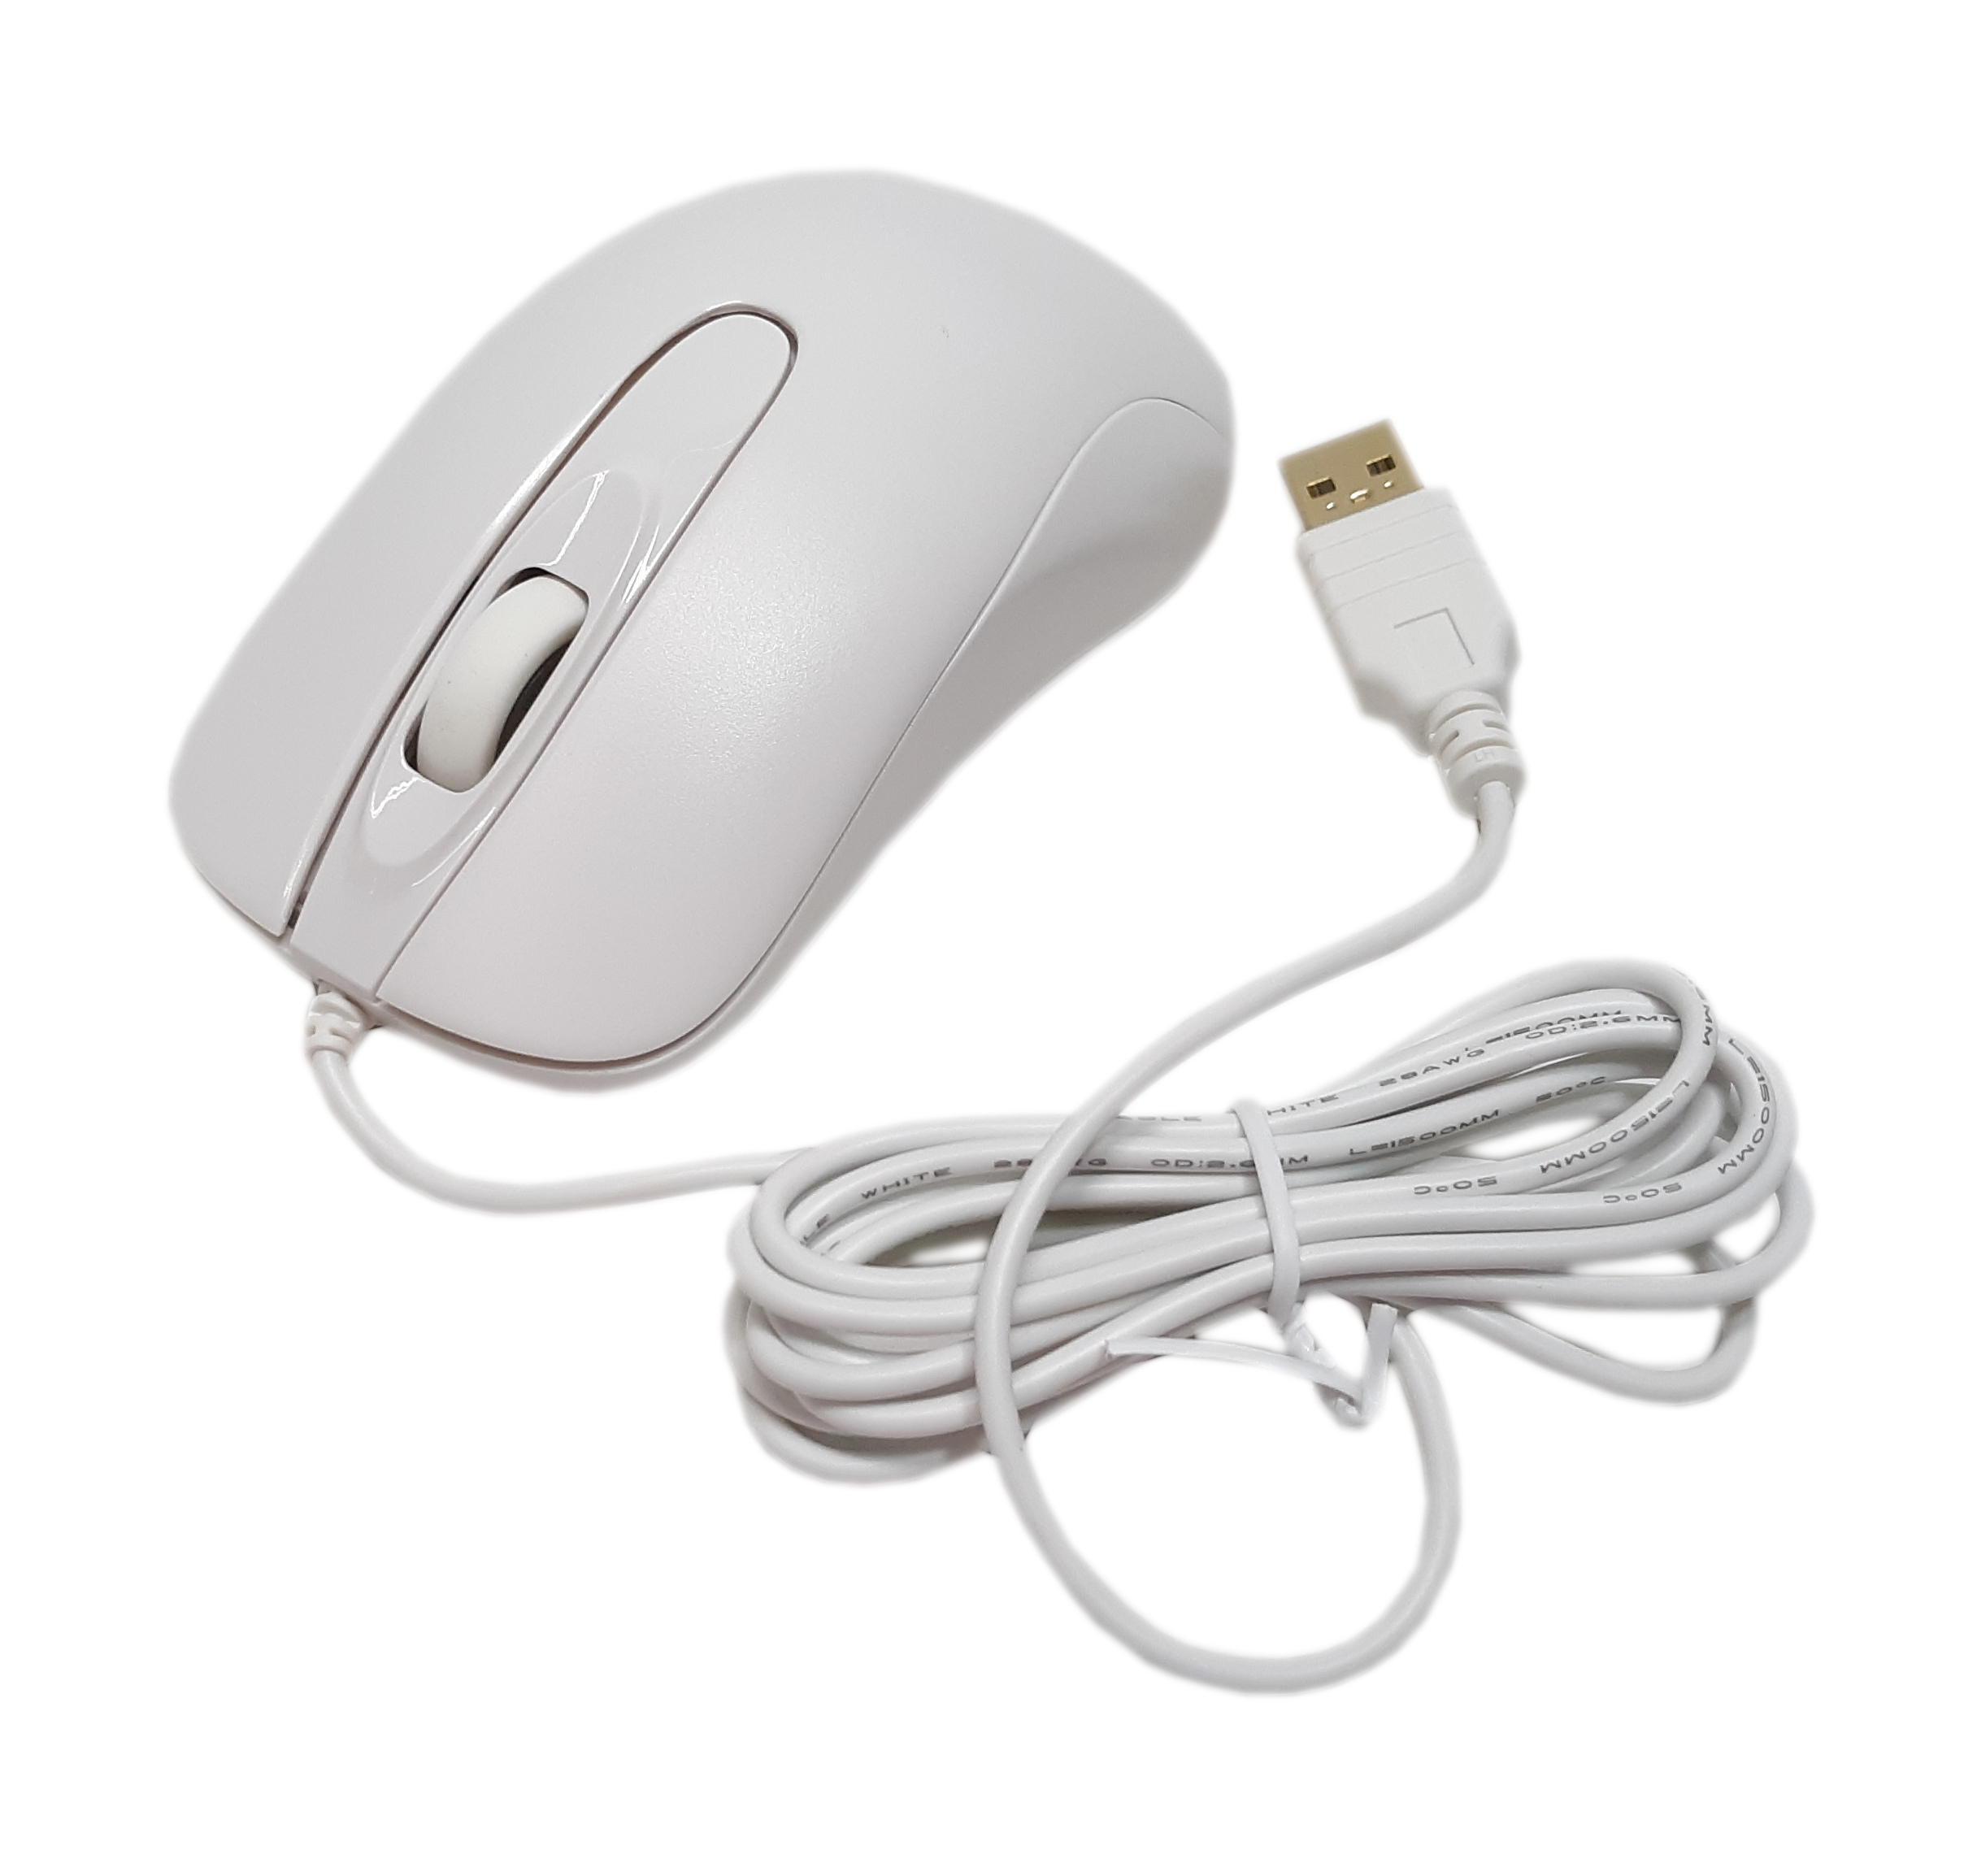 HP USB Mouse Man & Machine Medical Lab Healthcare Edition White 5.0V 100mA 926943-001 927233-001 - Click Image to Close